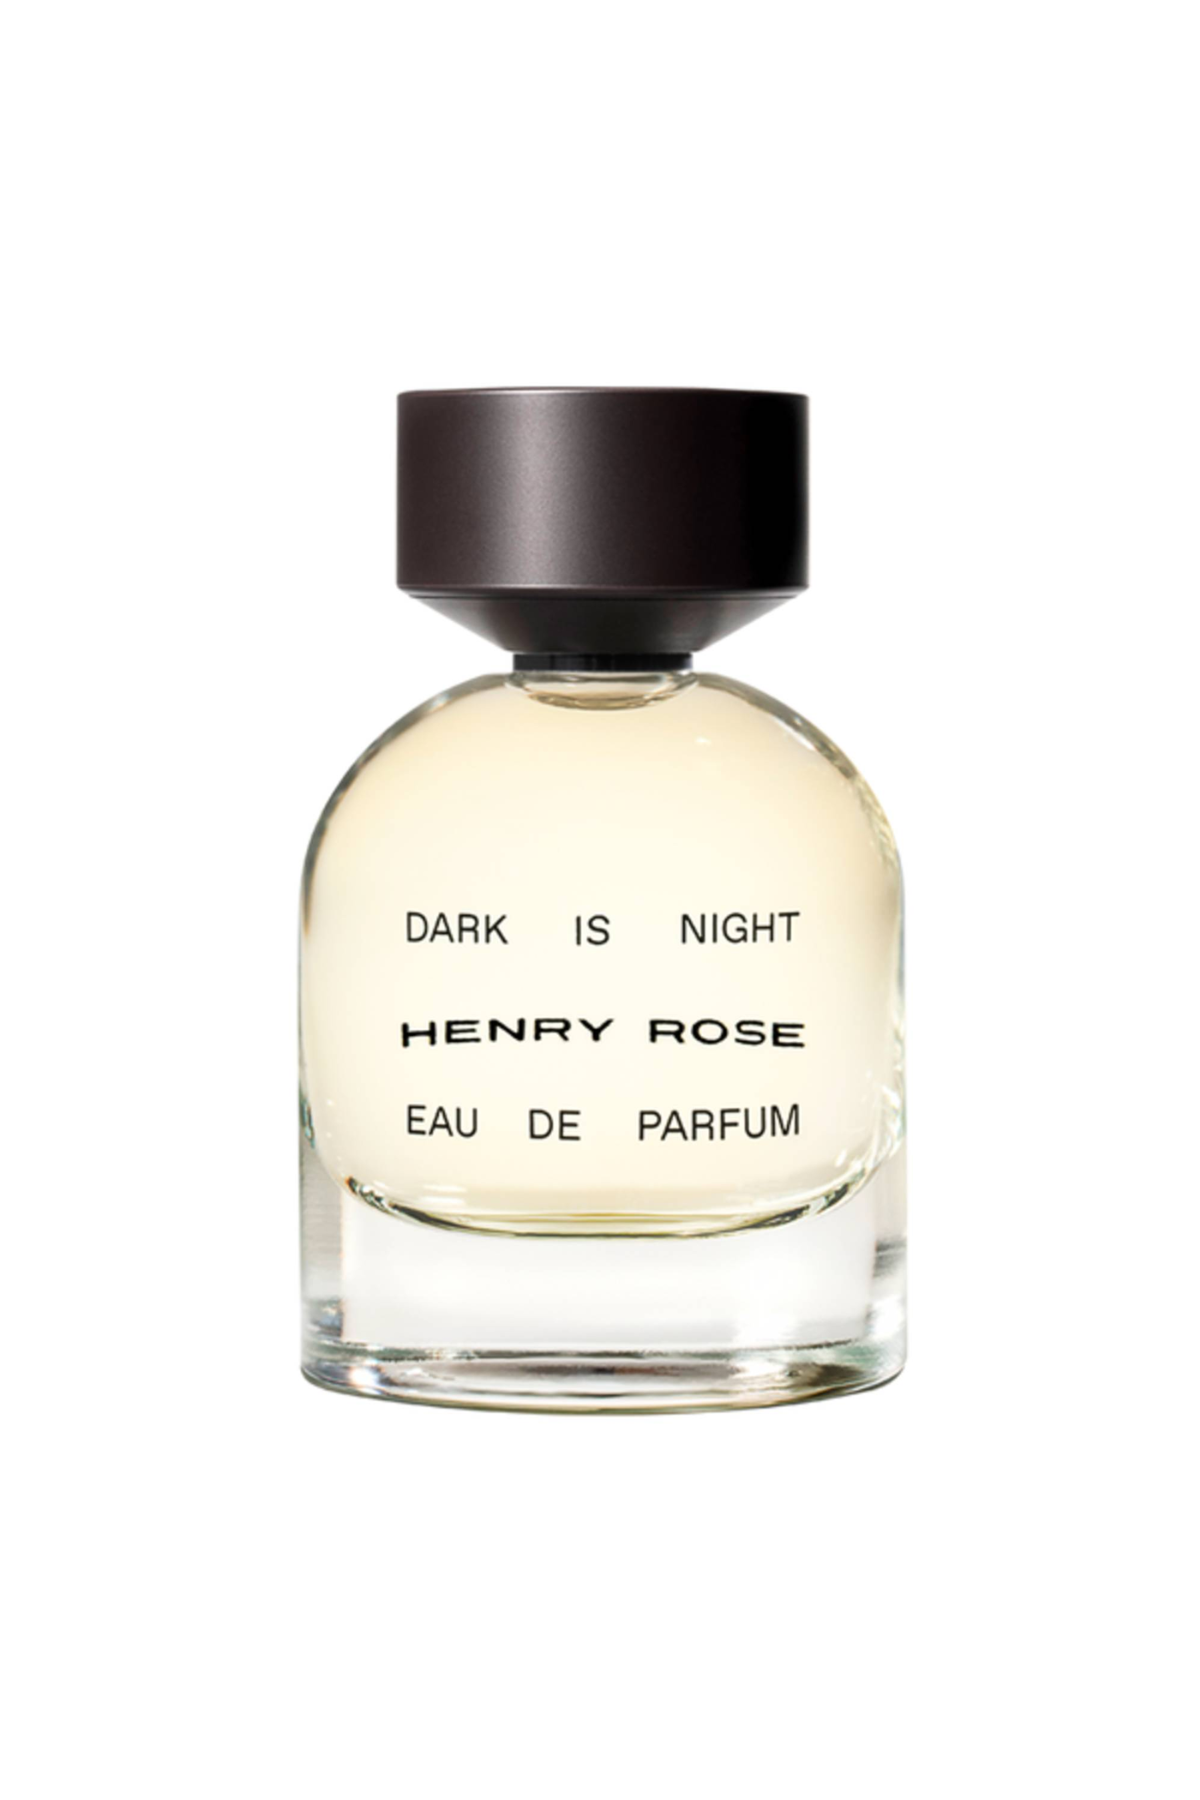 A bottle of Henry Rose Dark Is Night perfume against a white background.